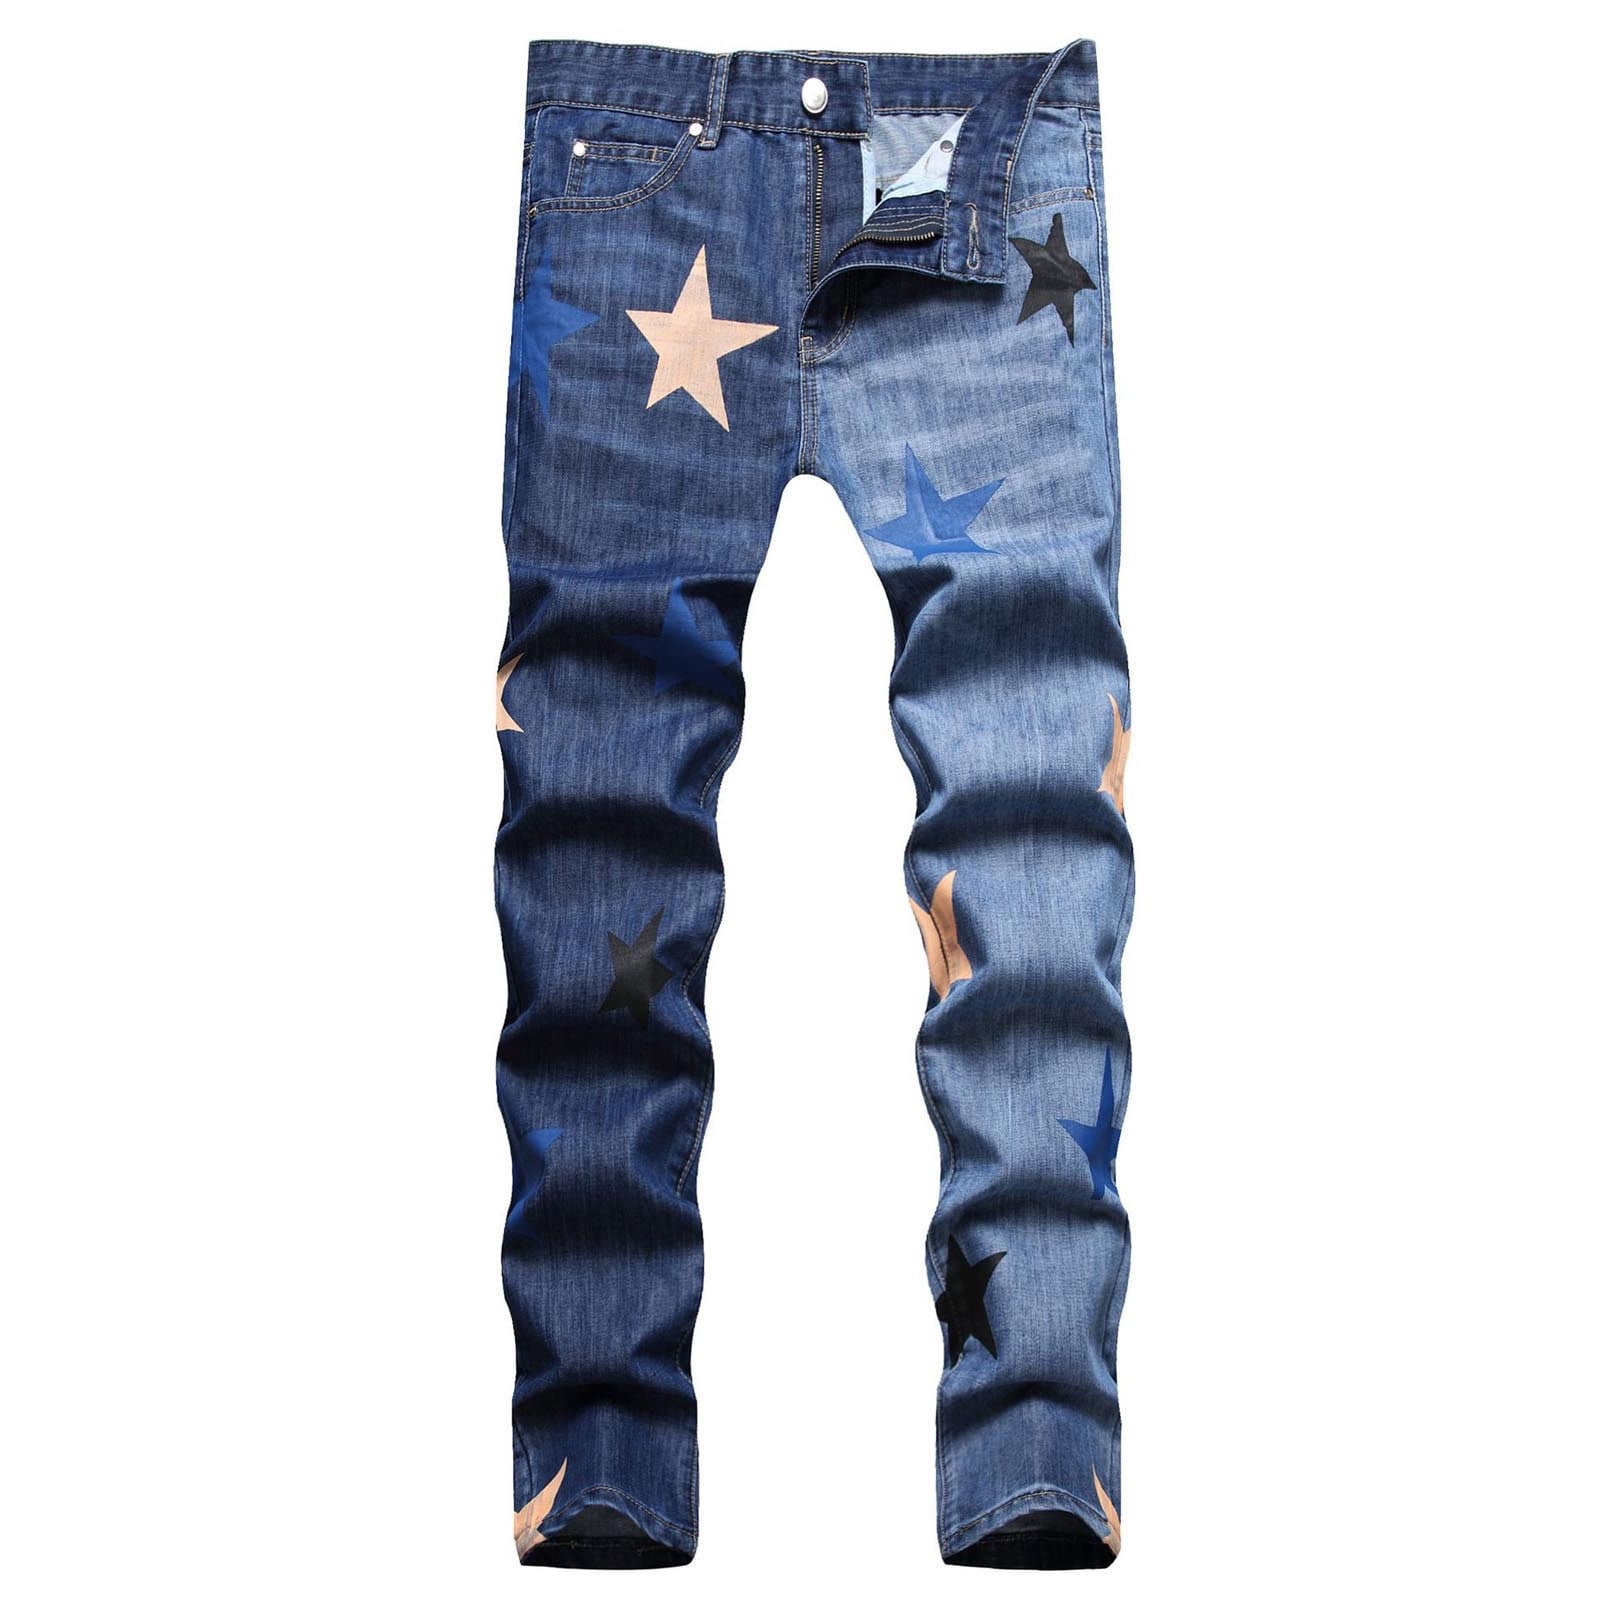 European Style Jeans Men Stretch Elastic Slim Denim Jeans Mens Casual  Washed Pockets Jeans for Man